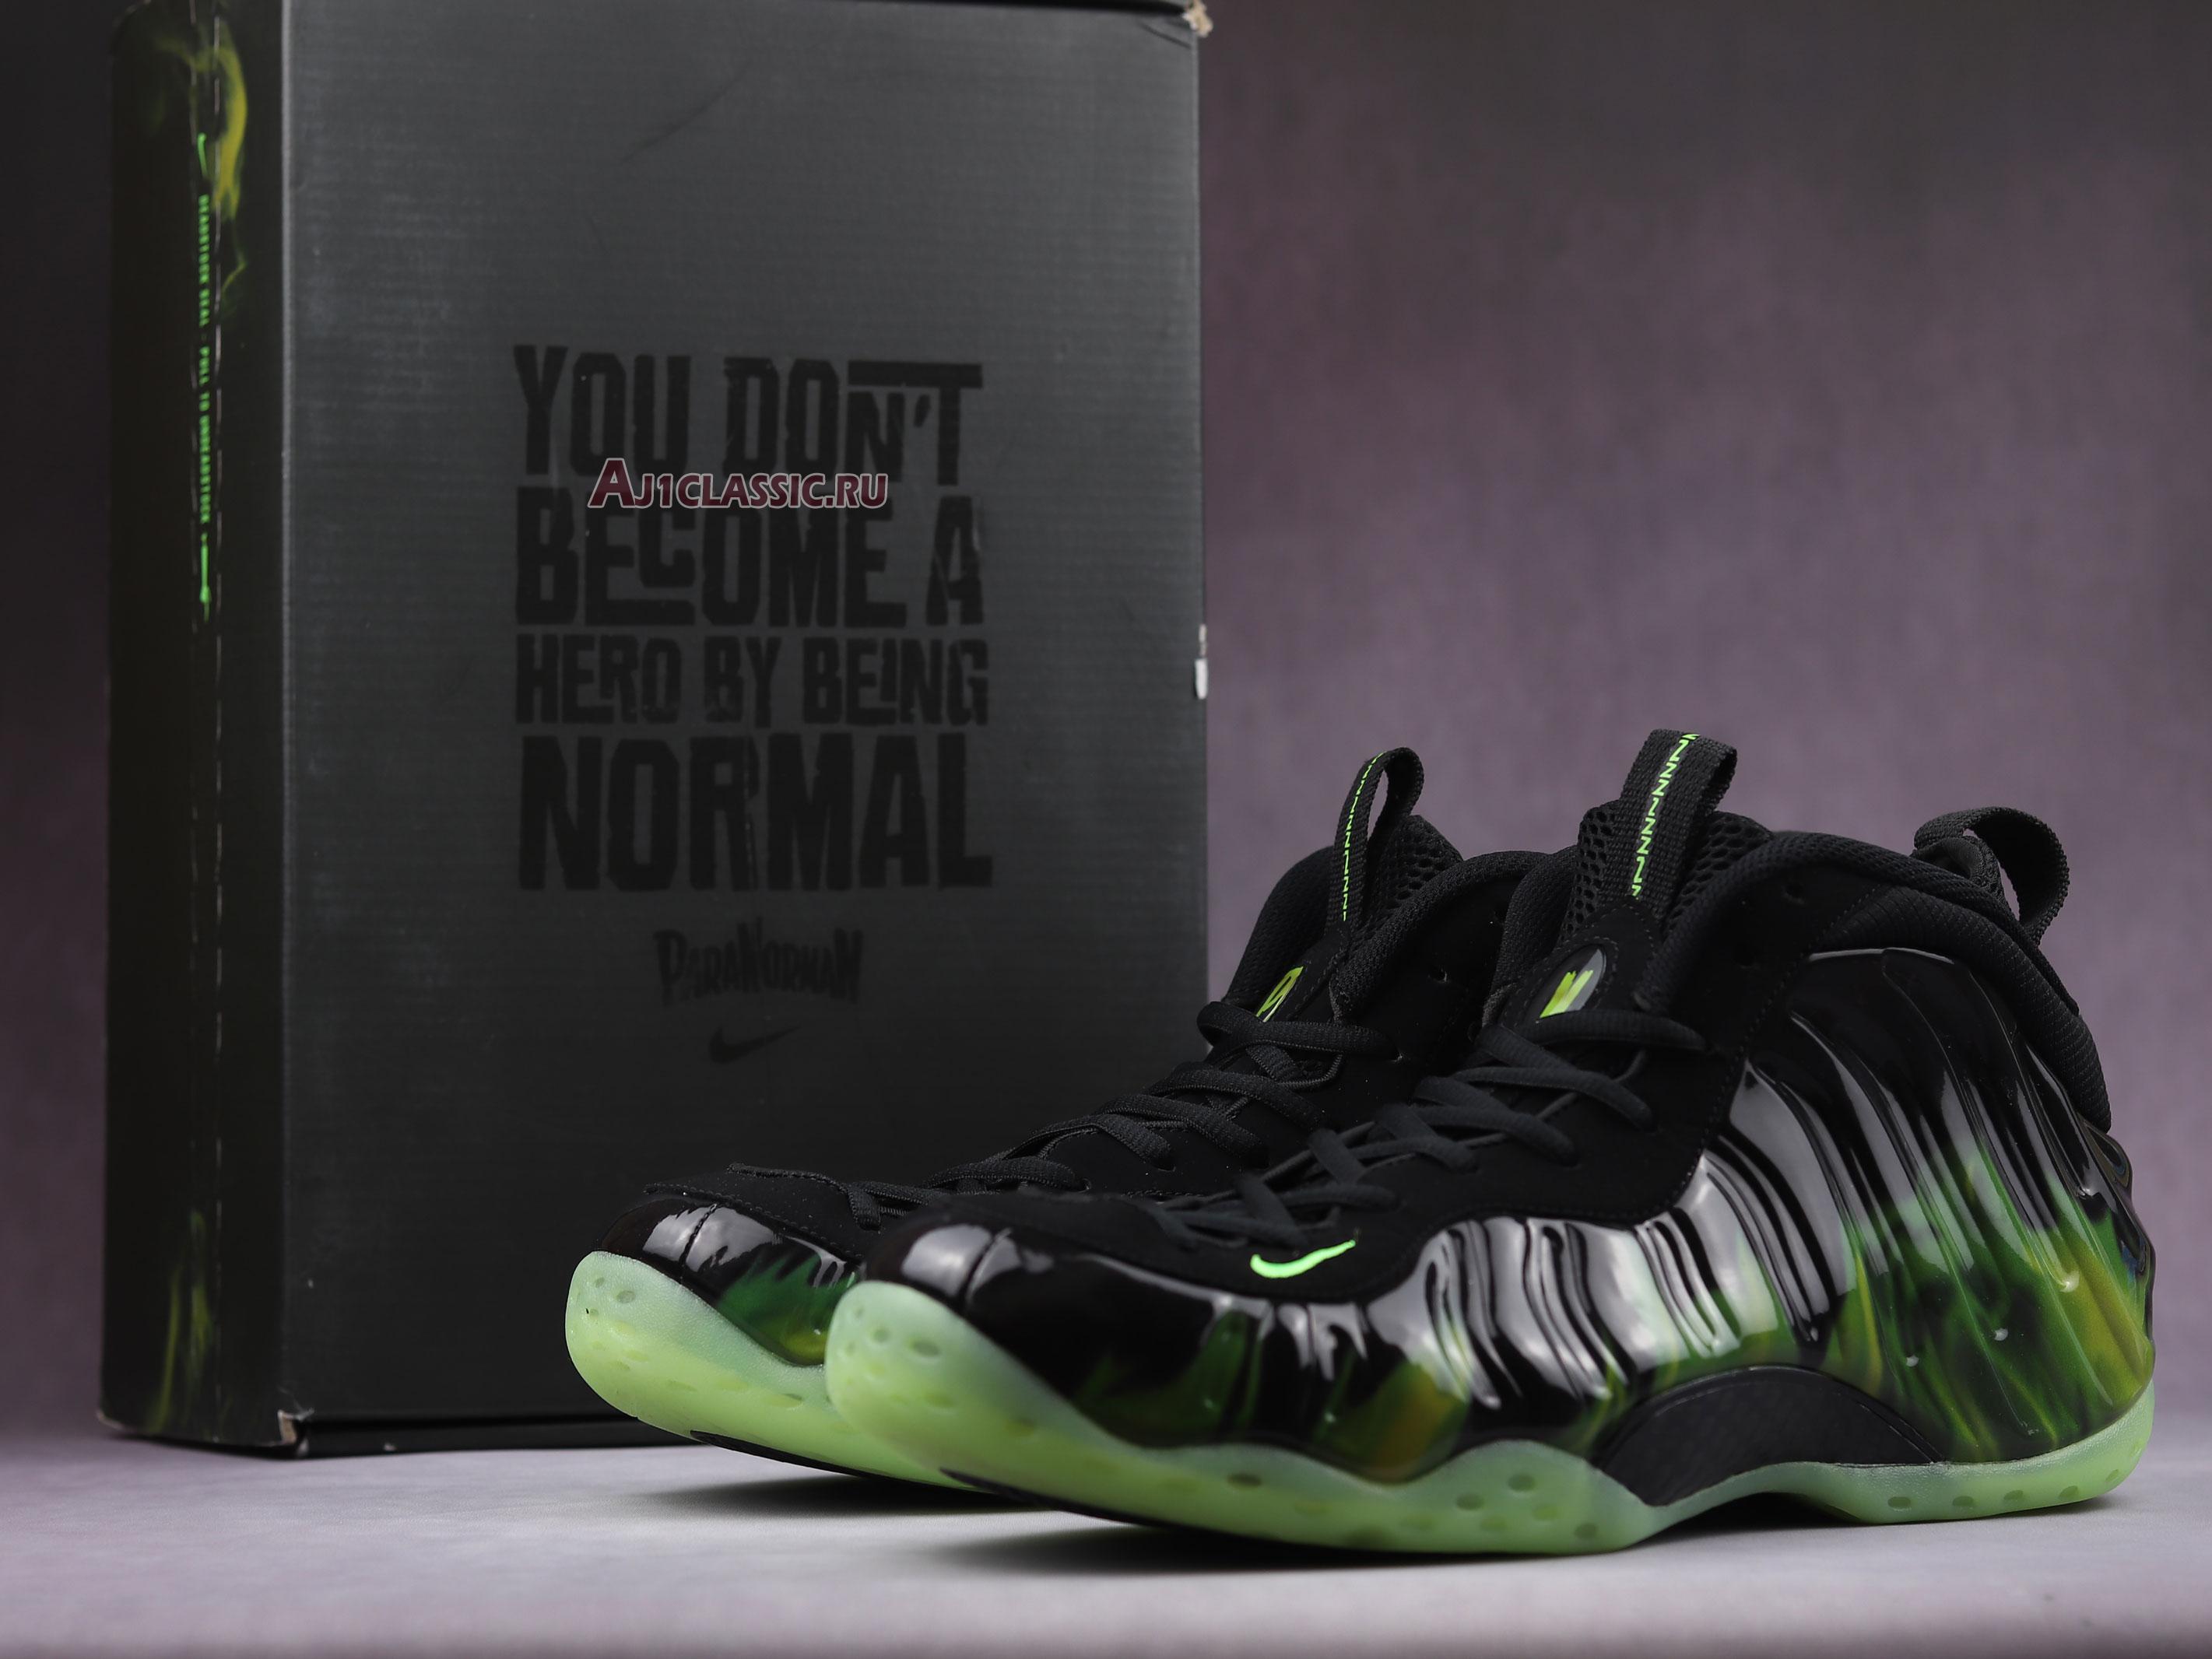 Nike Air Foamposite One "Paranorman" 579771-003